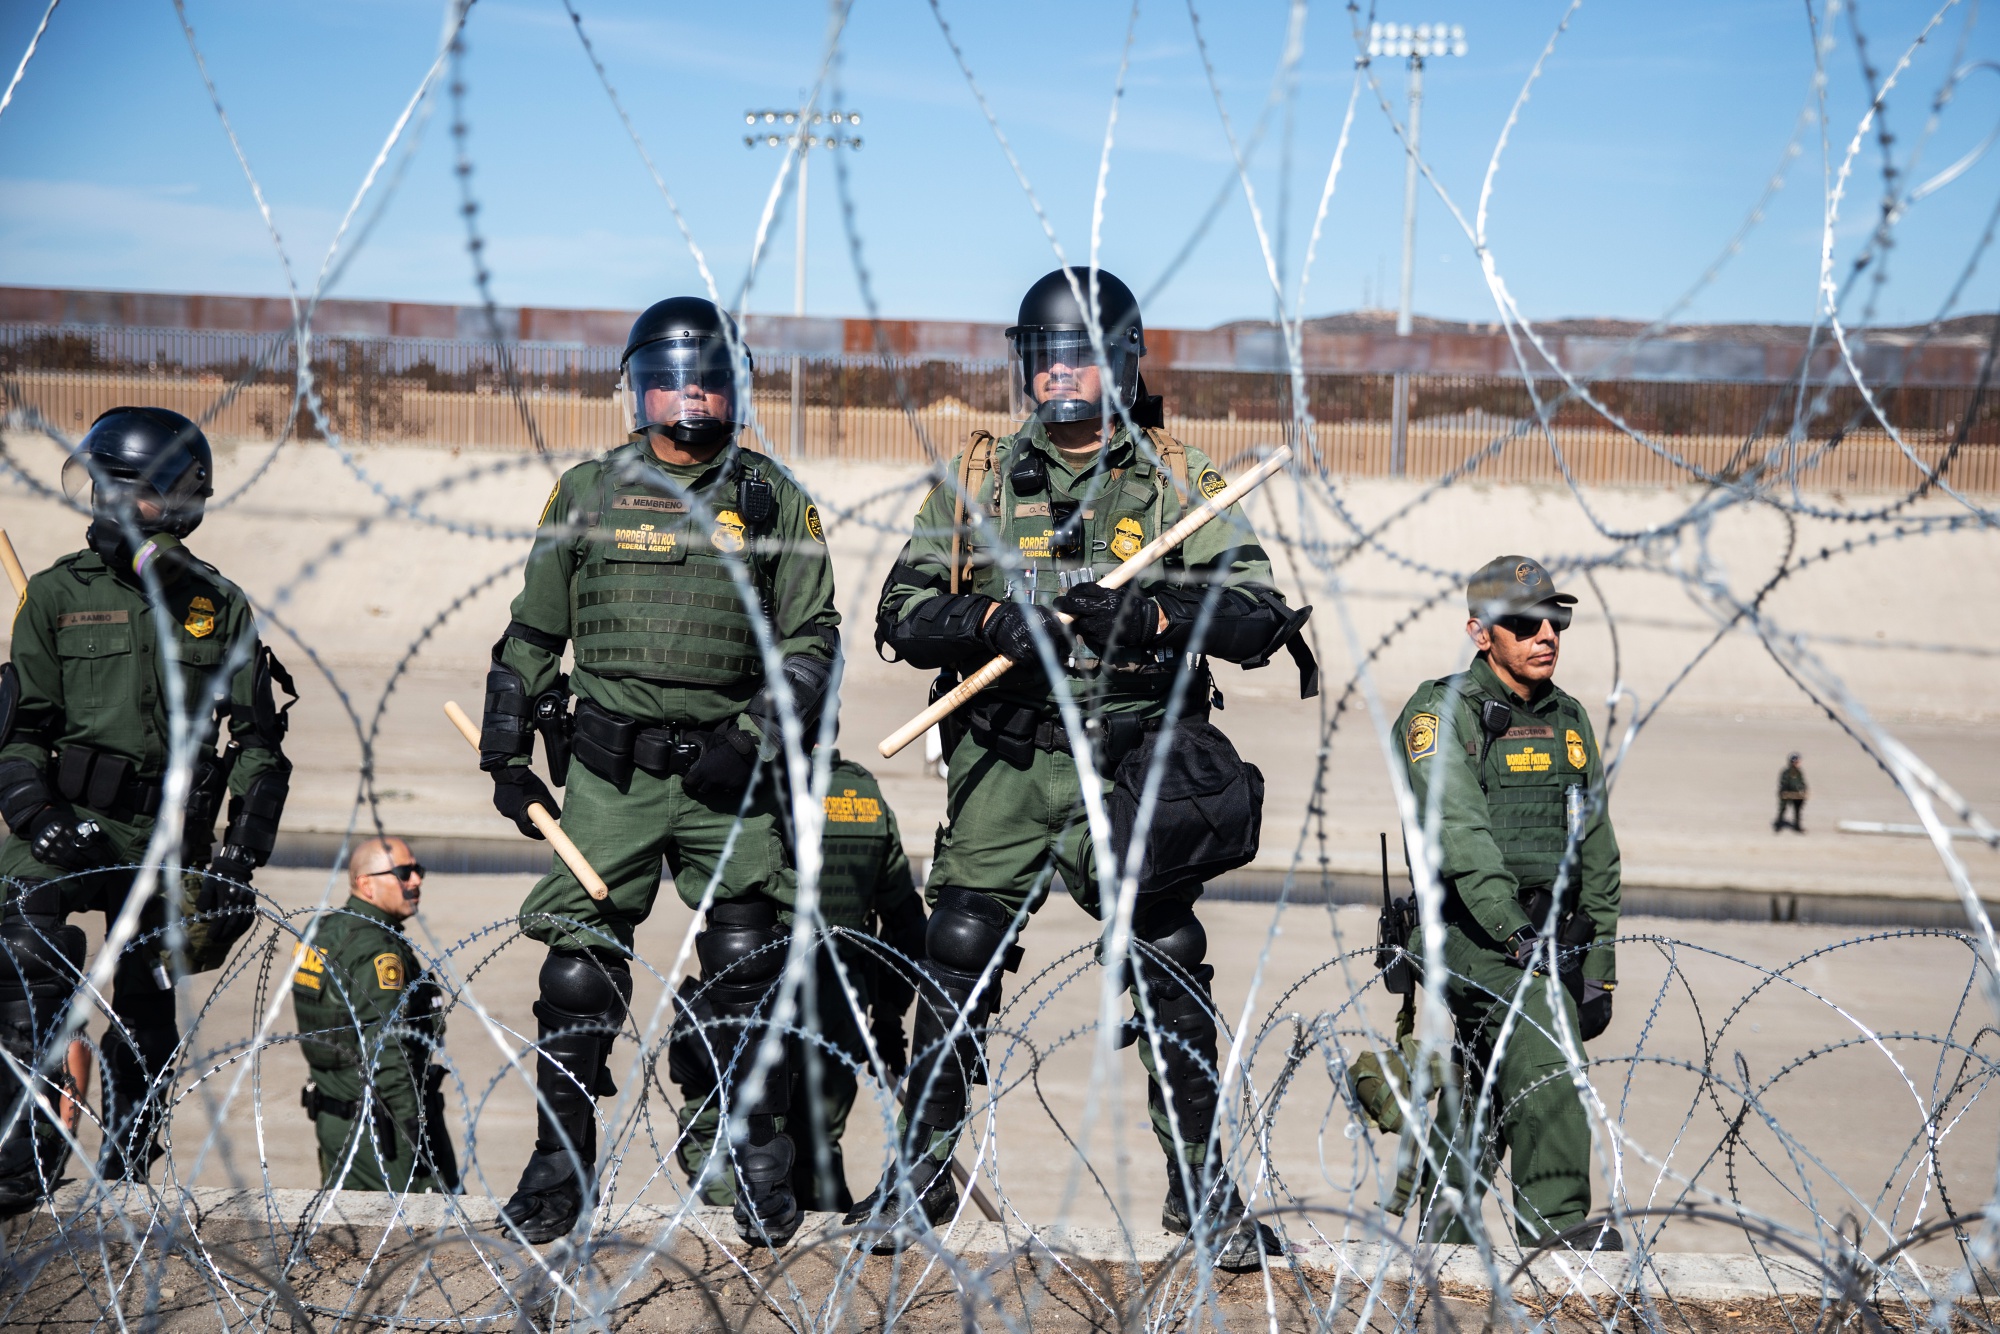 U.S. Customs and Border Protection (CBP) officers stand guard along the US and Mexico border.